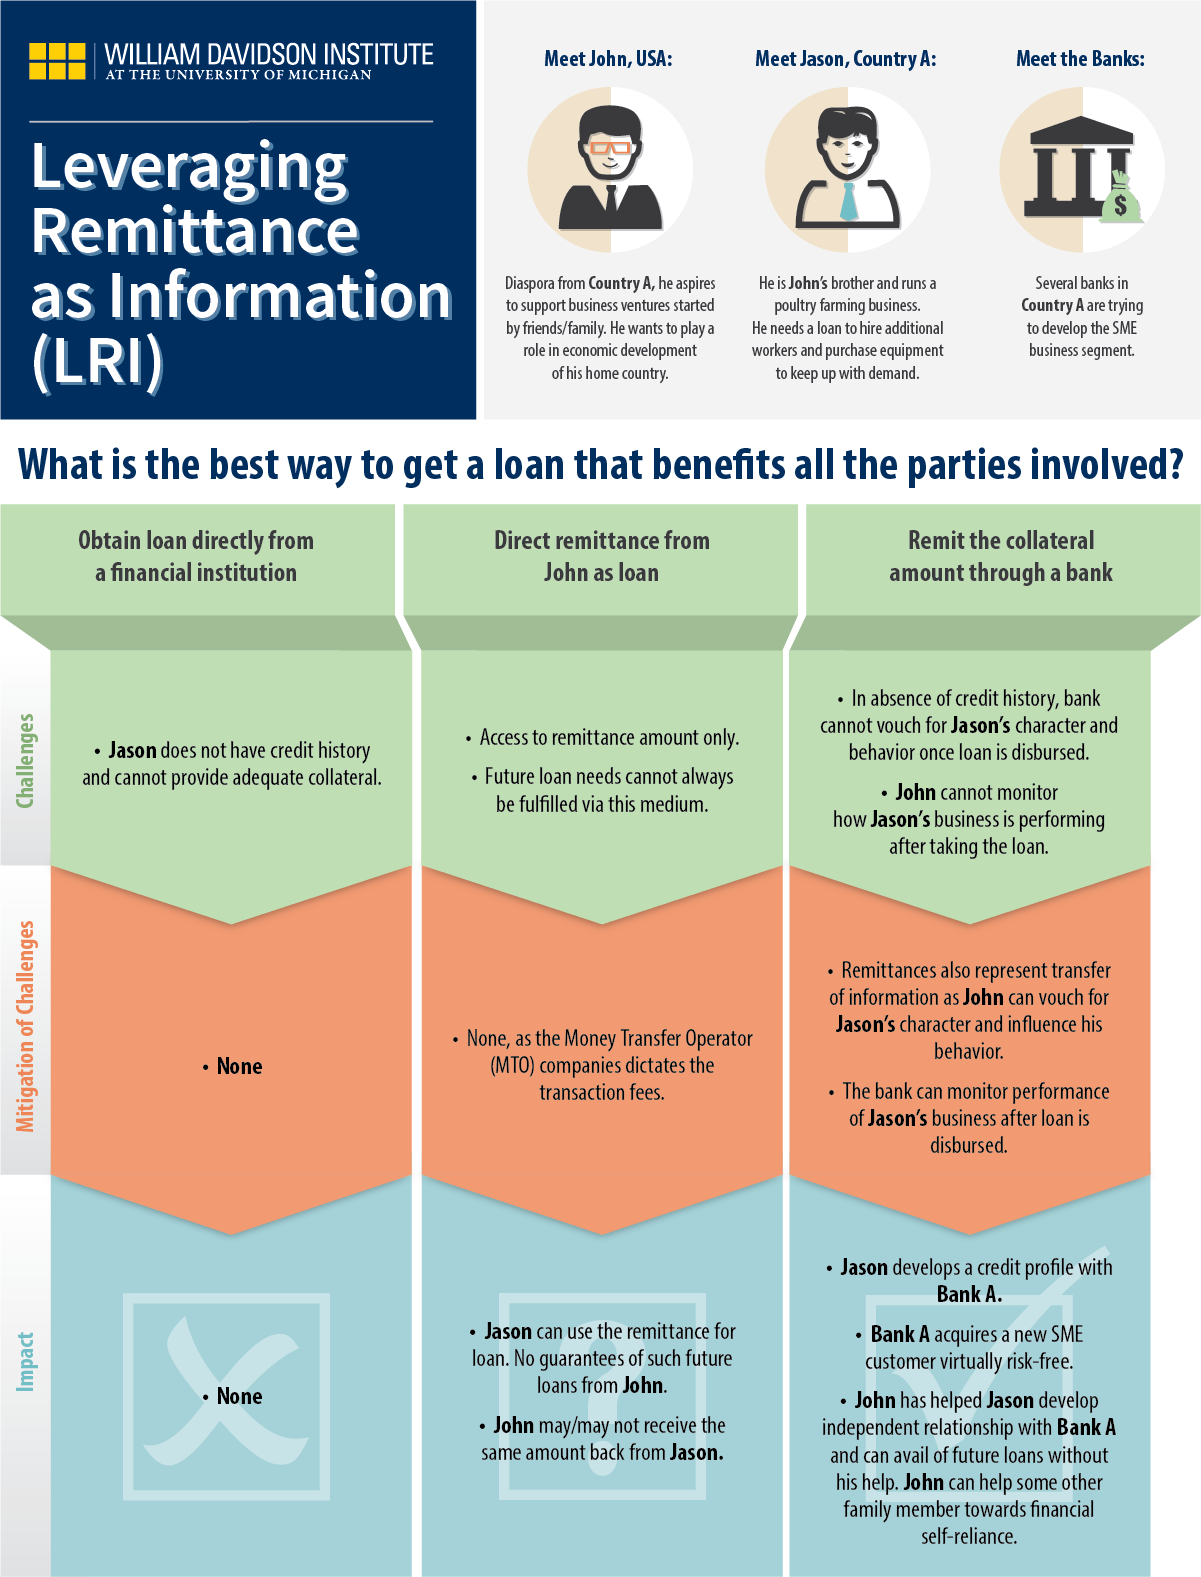 Leveraging Remittance as Information graphic page 1